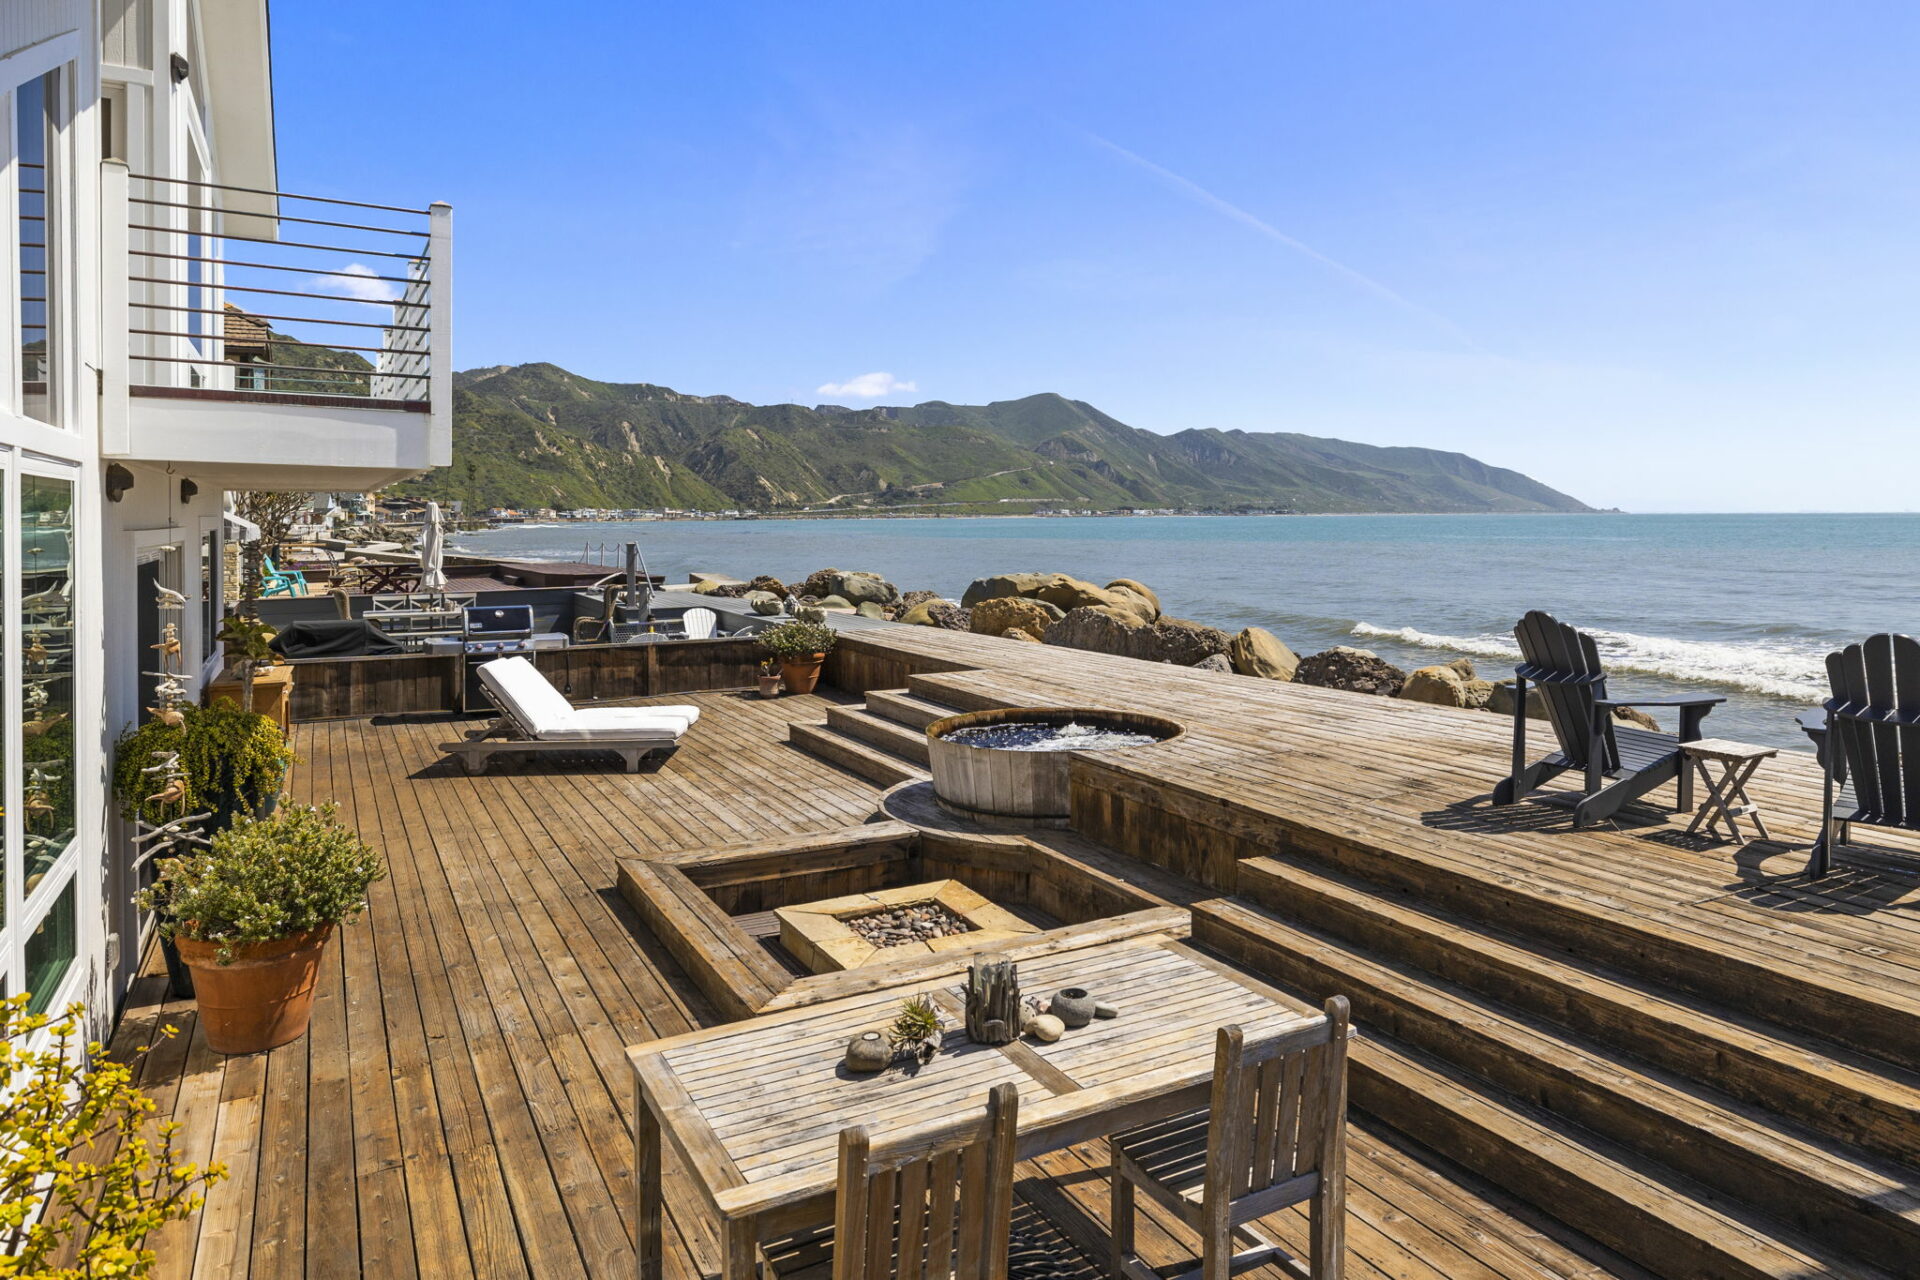 Coastal terrace with outdoor furniture overlooking a scenic view of the ocean and hills.